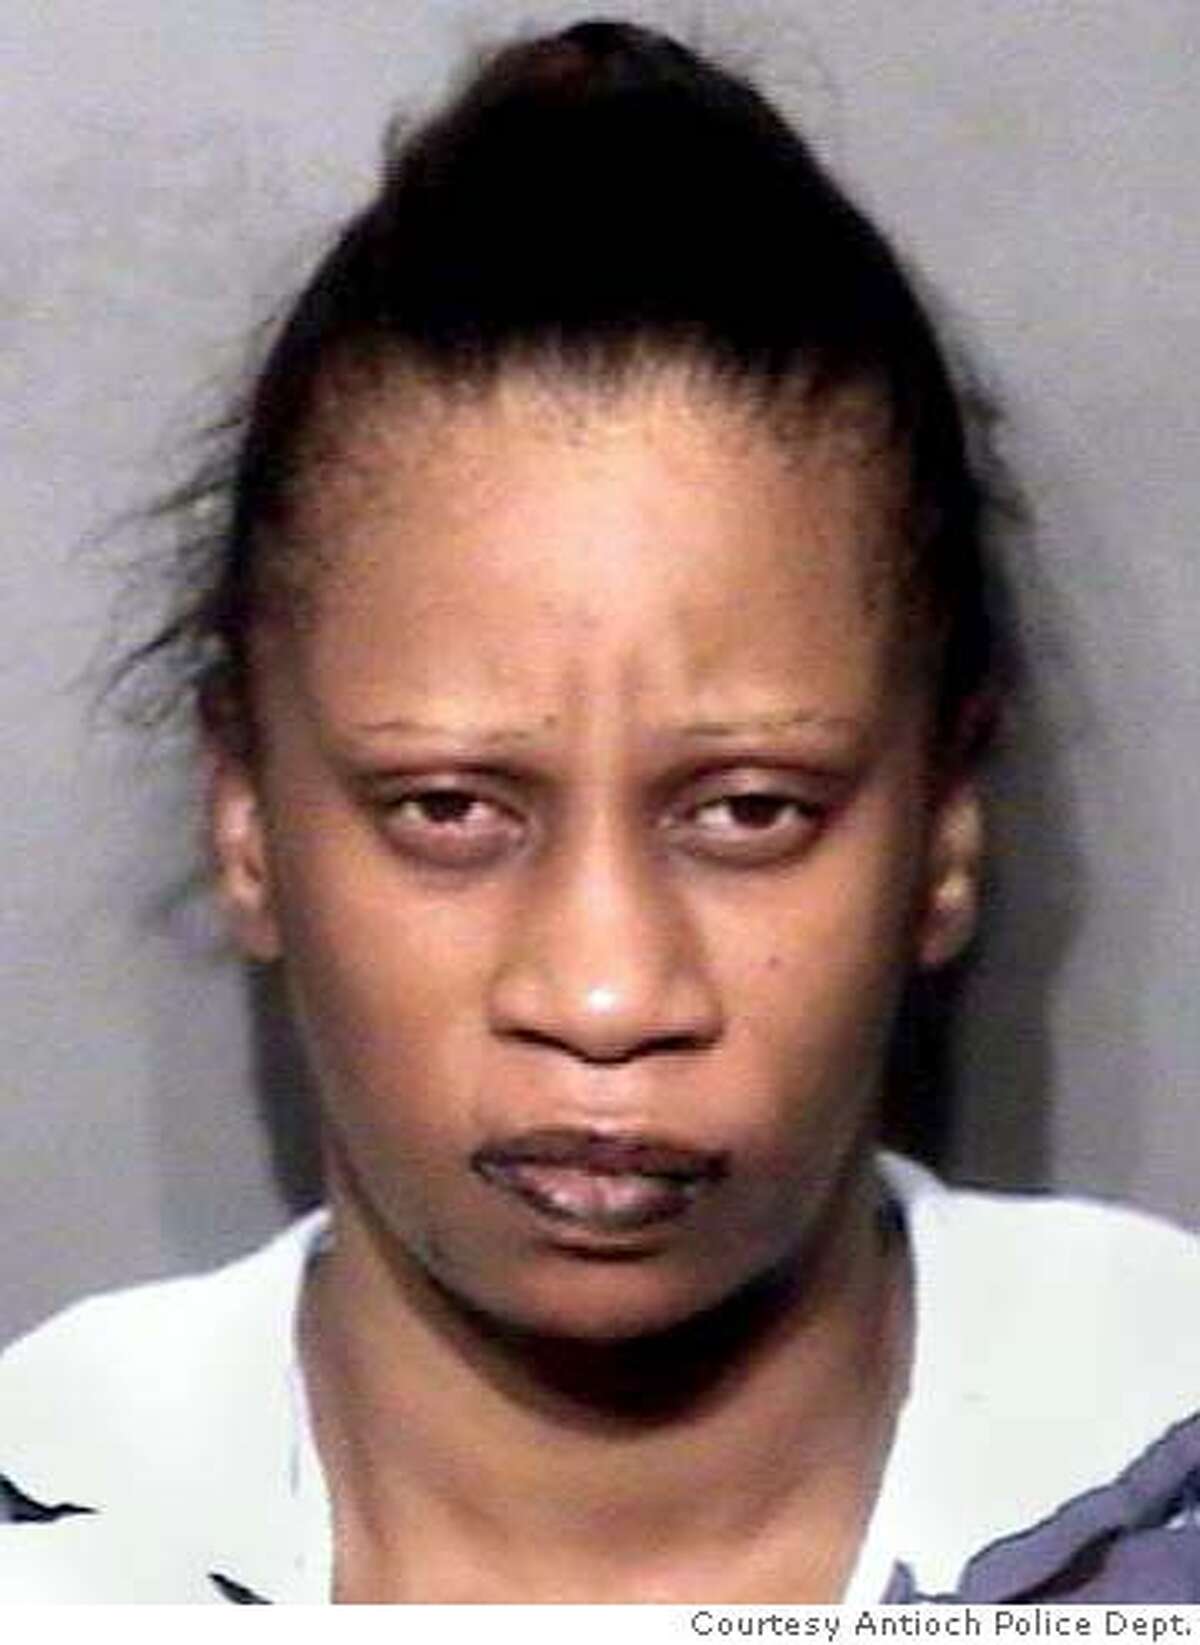 Shemeeka Davis was arrested Tuesday on suspicion of murder and child abuse in connection with the death of a 15-year-old girl who was under her care, police said. (Courtesy Antioch Police Dept.)